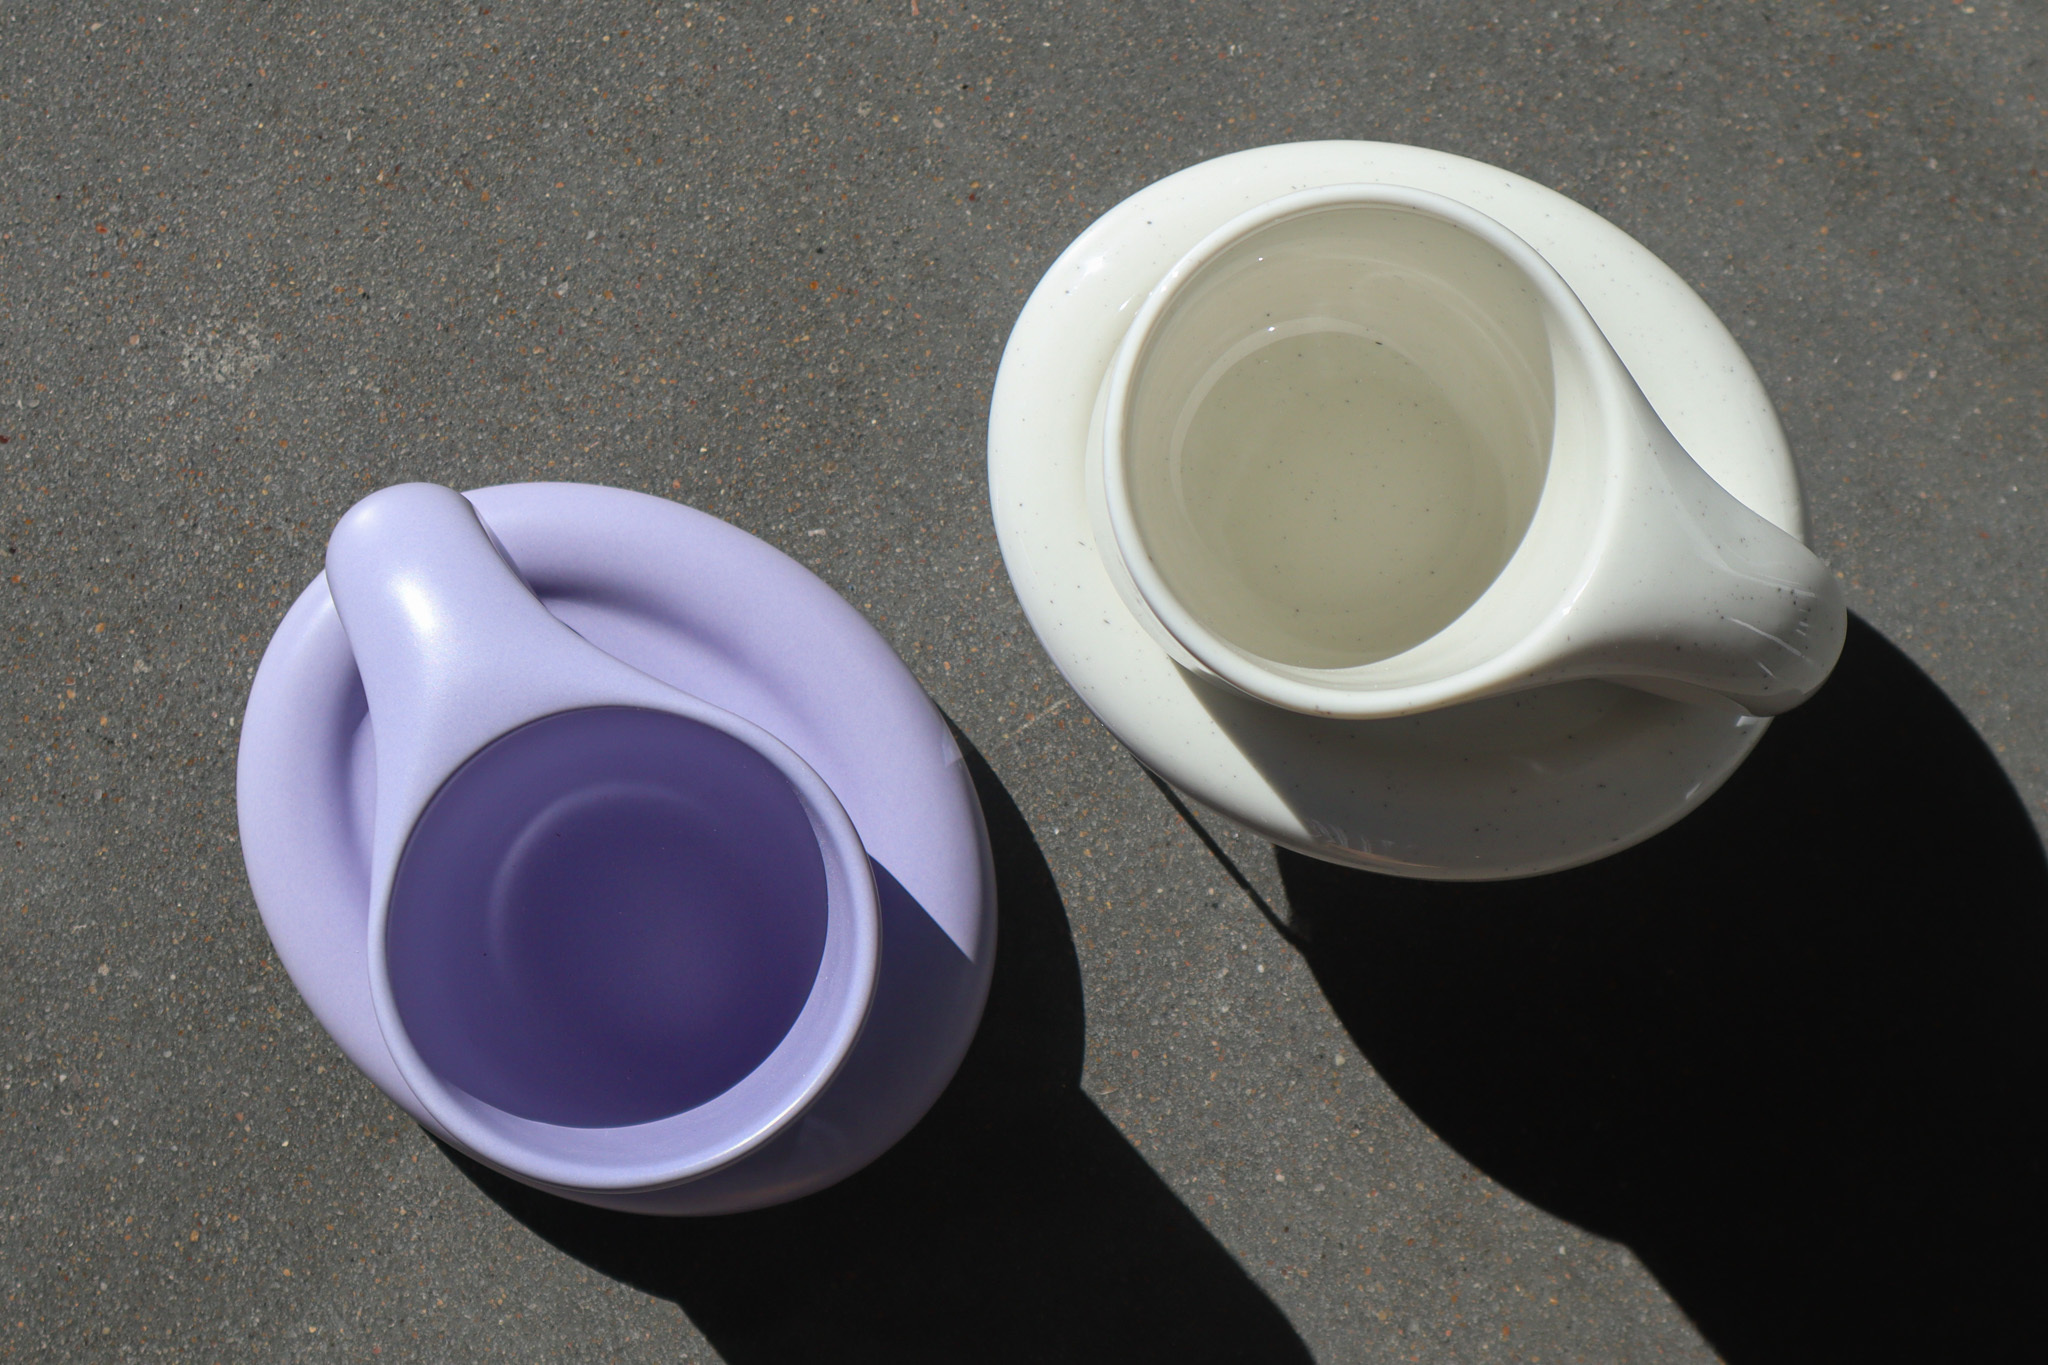 Two mugs with matching saucers sit on a cement surface. On the left is a lavender colored mug, and on the right a white mug with black flecks.